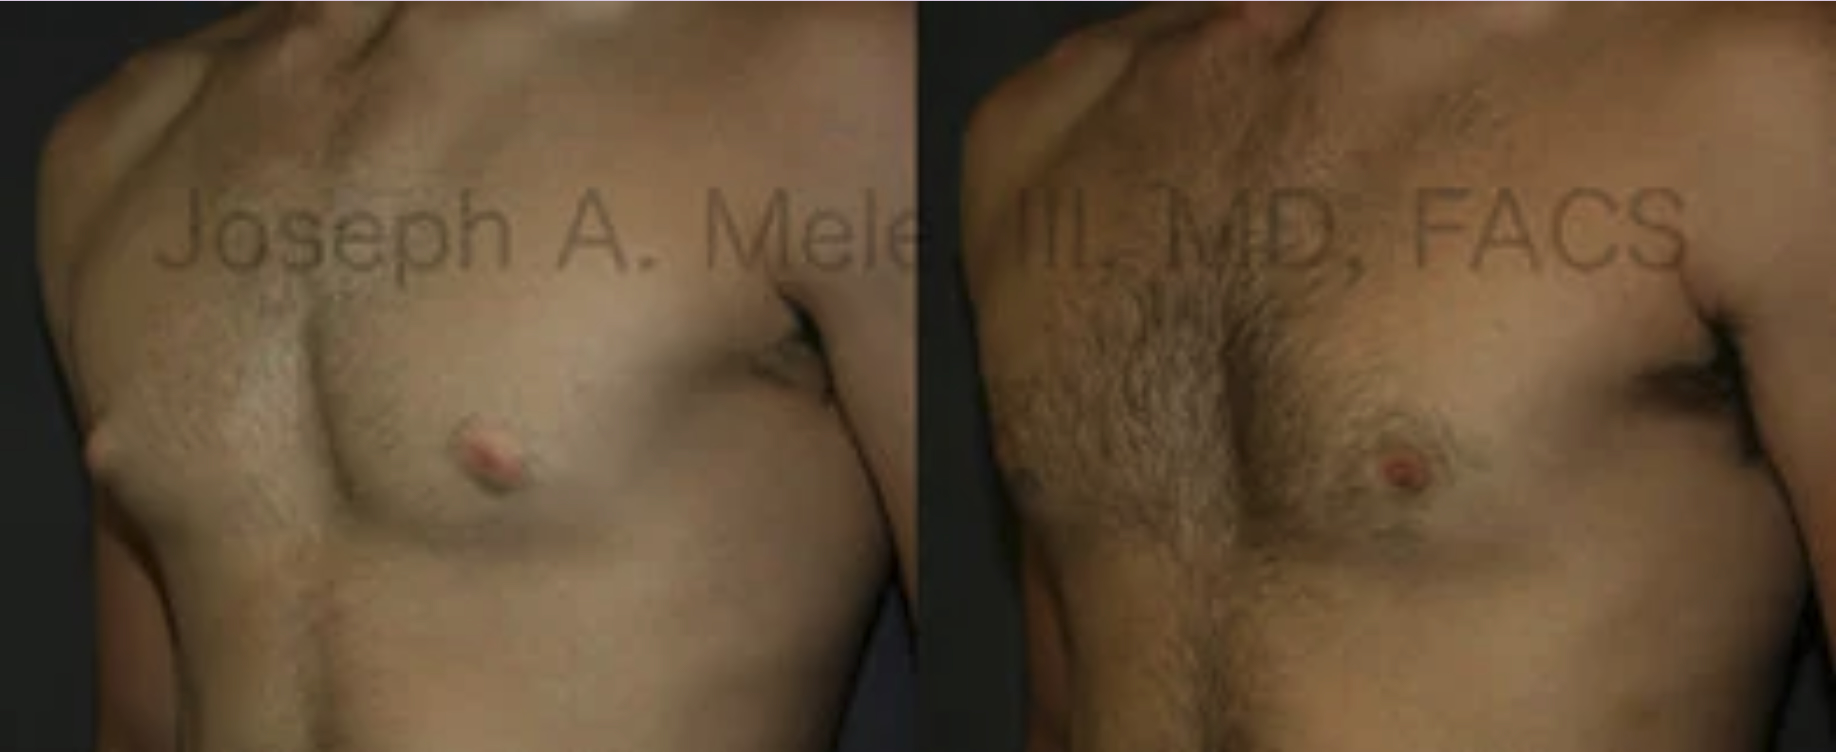 Puffy nipple reduction before and after pictures (male)